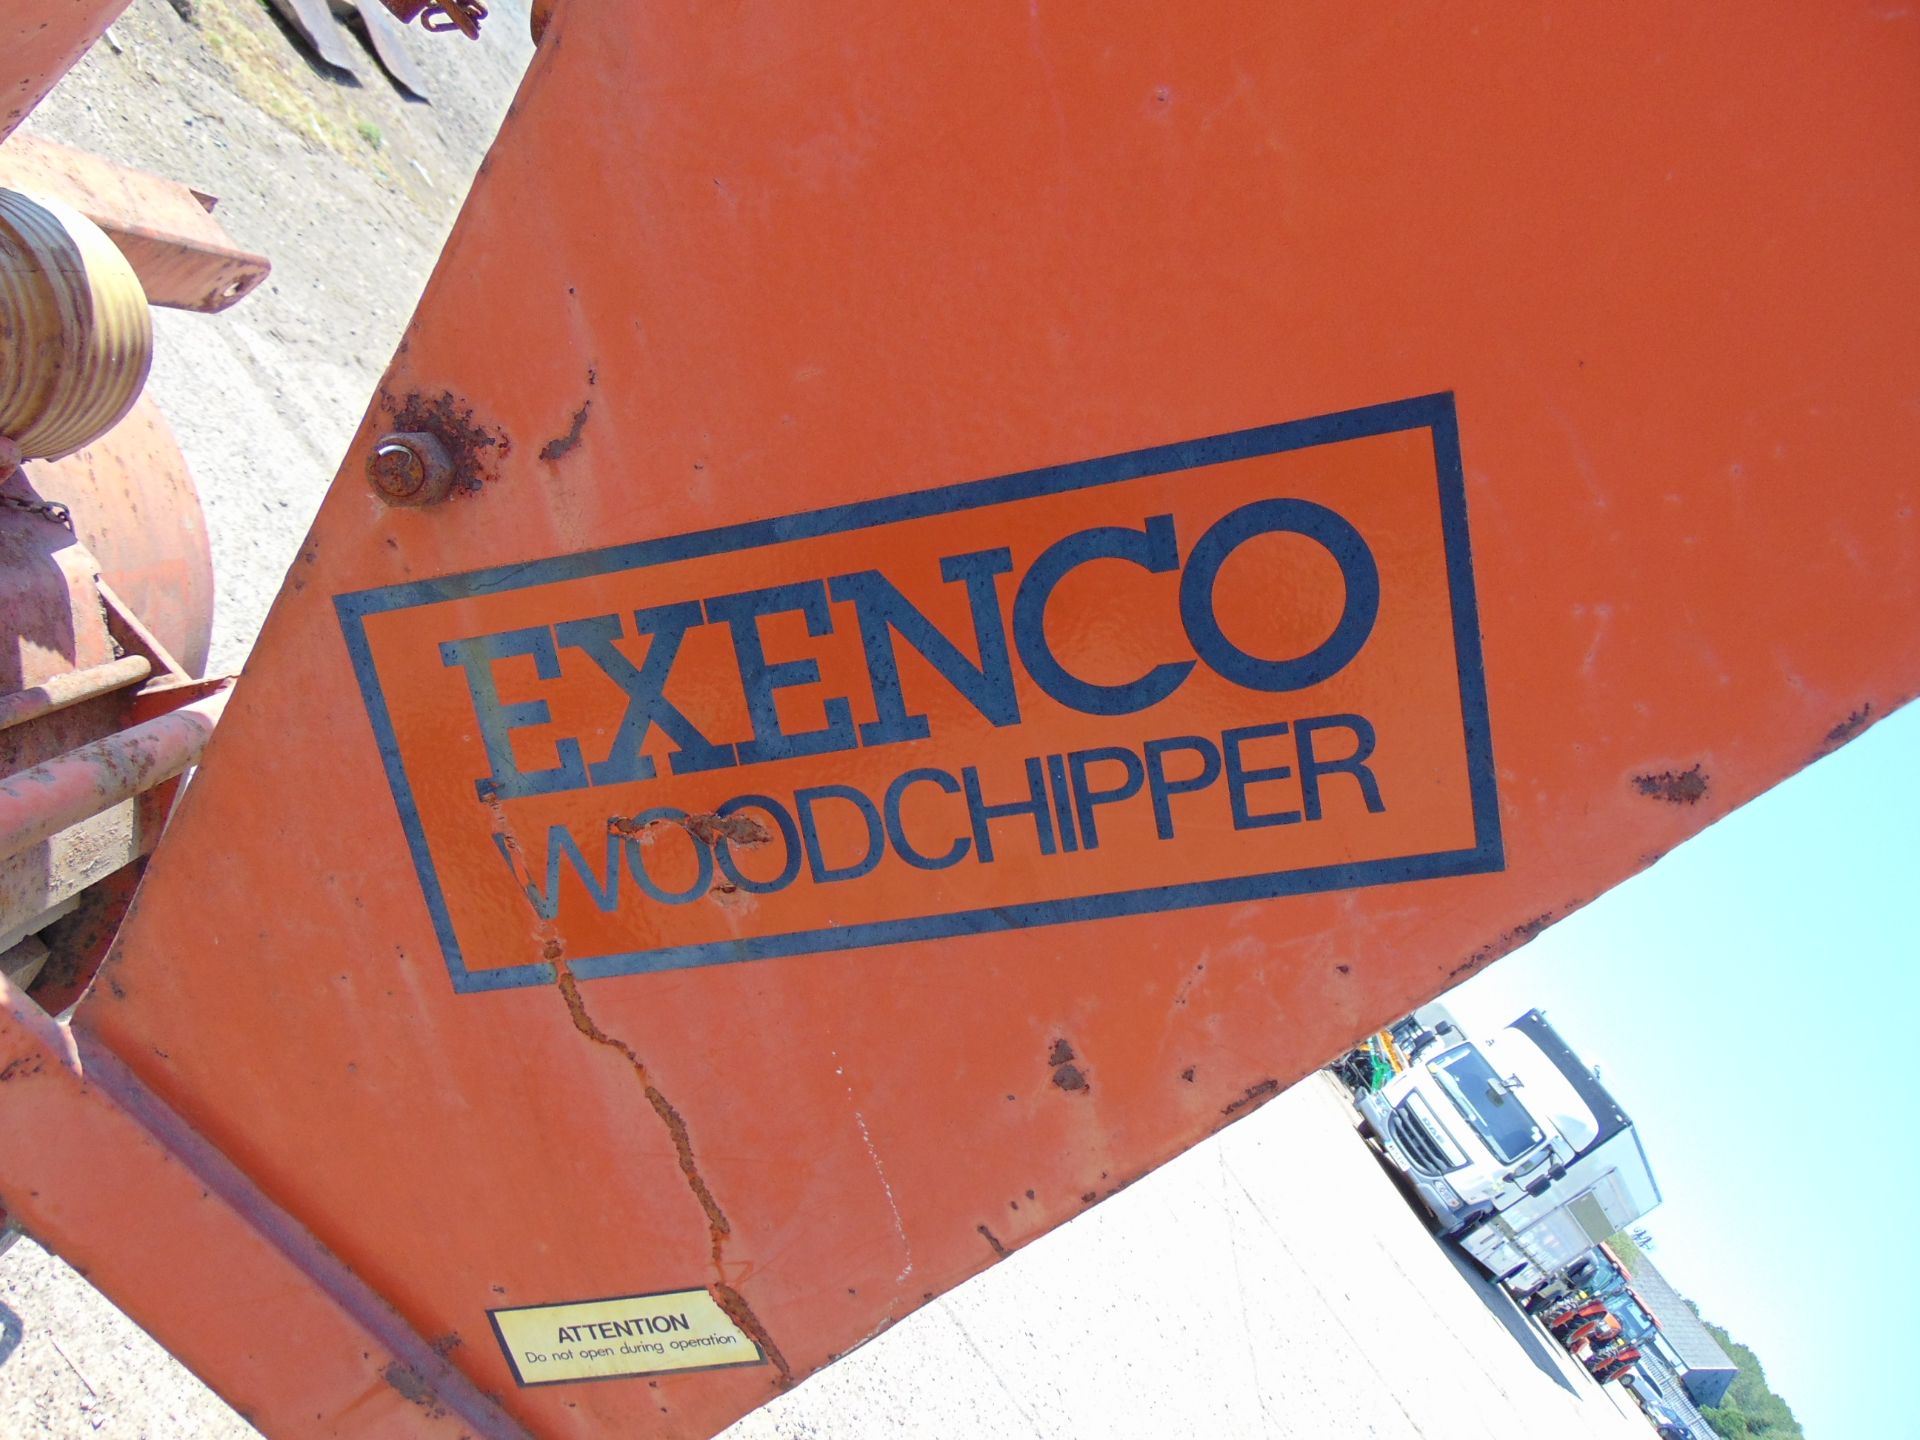 Exenco Wood Chipper 350p PTO driven with 3 point linkage - Image 8 of 11